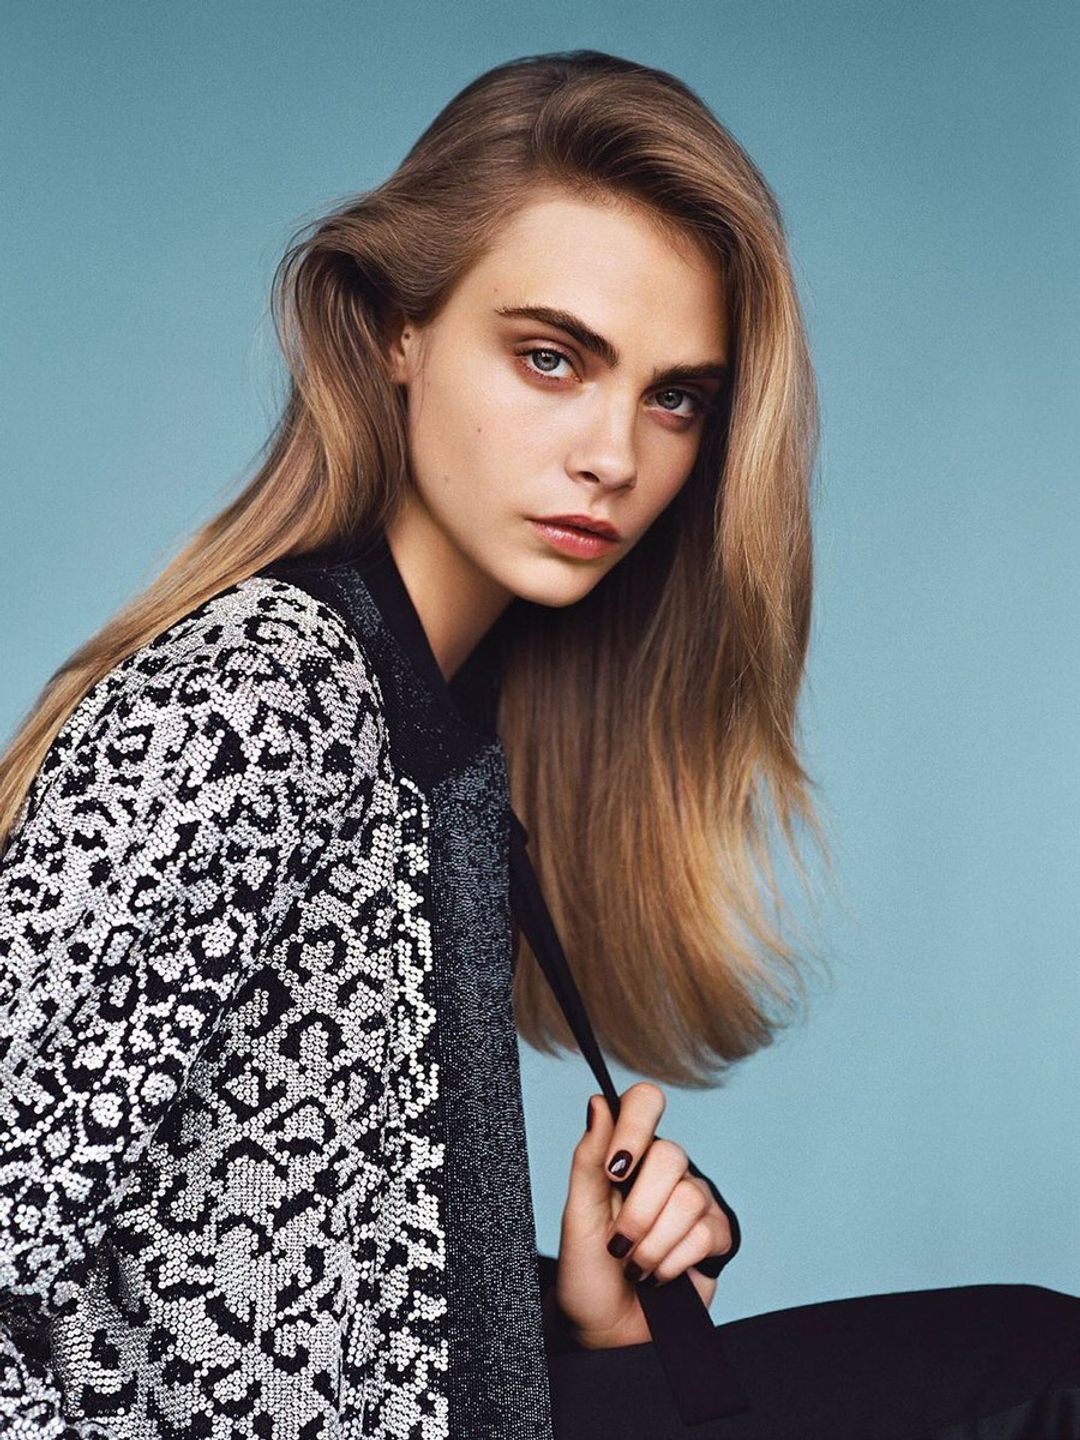 Cara Delevingne who are her parents